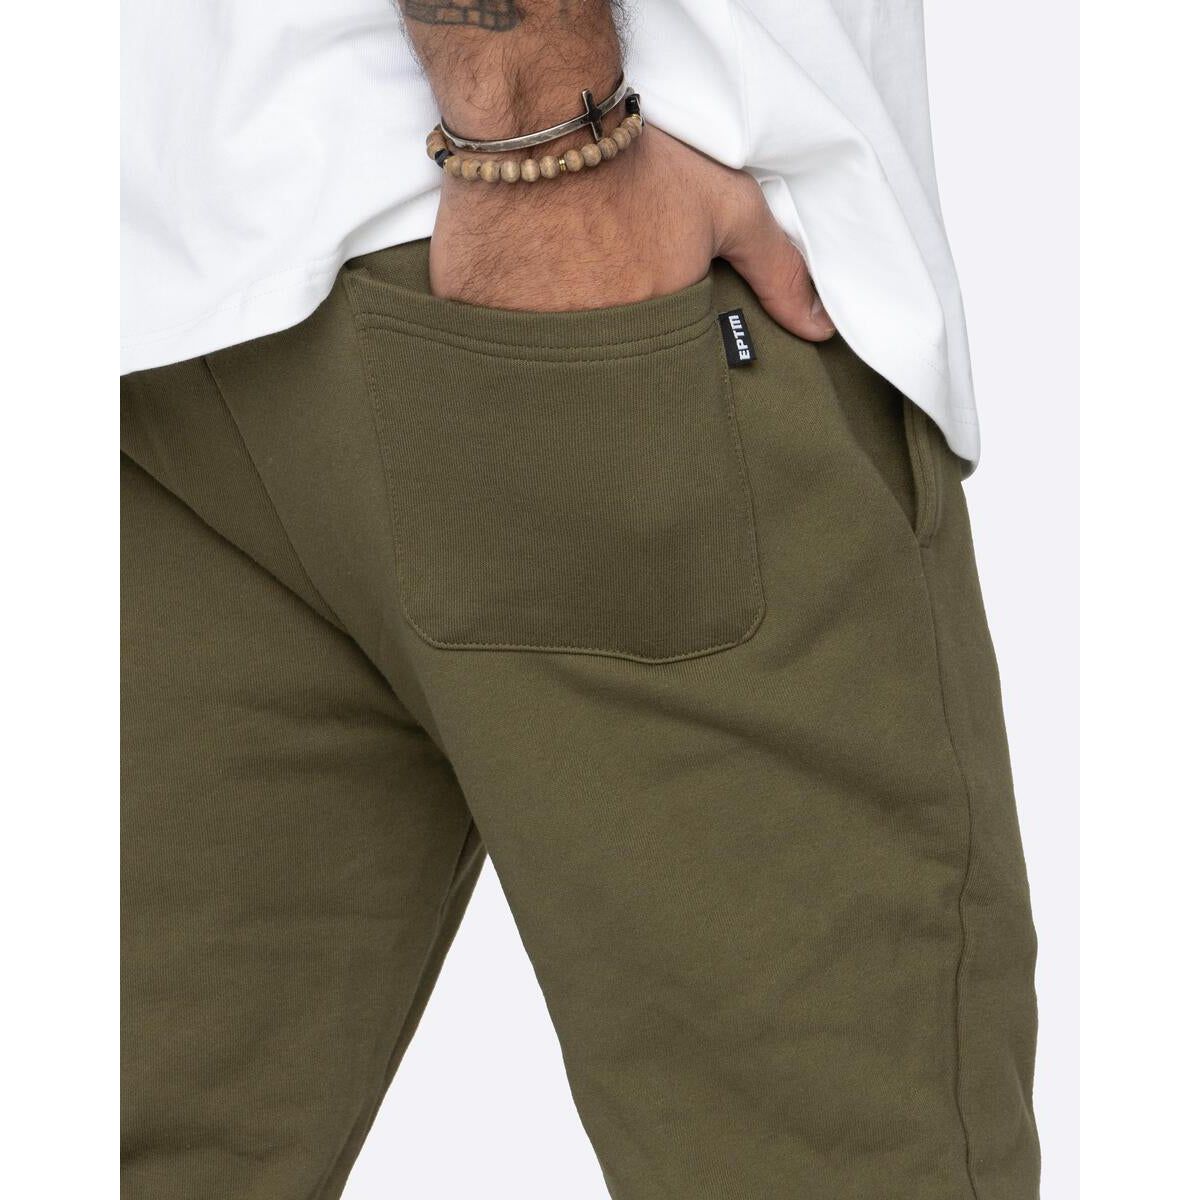 EPTM French Terry Flare Pants - Olive (EP10433)